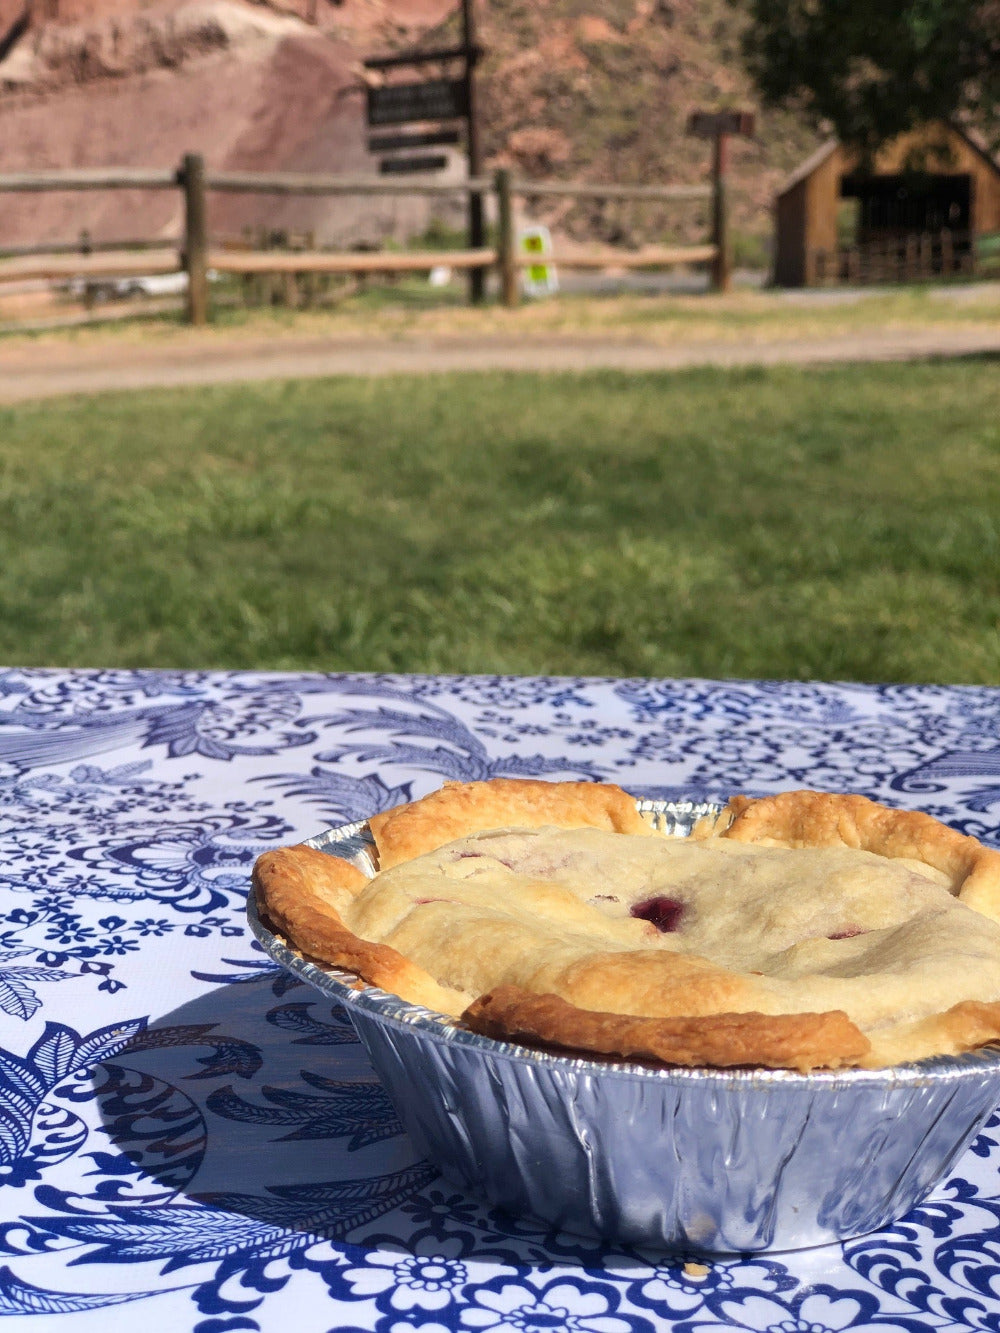 Berry pie on a Blue and White Outdoor Tablecloth